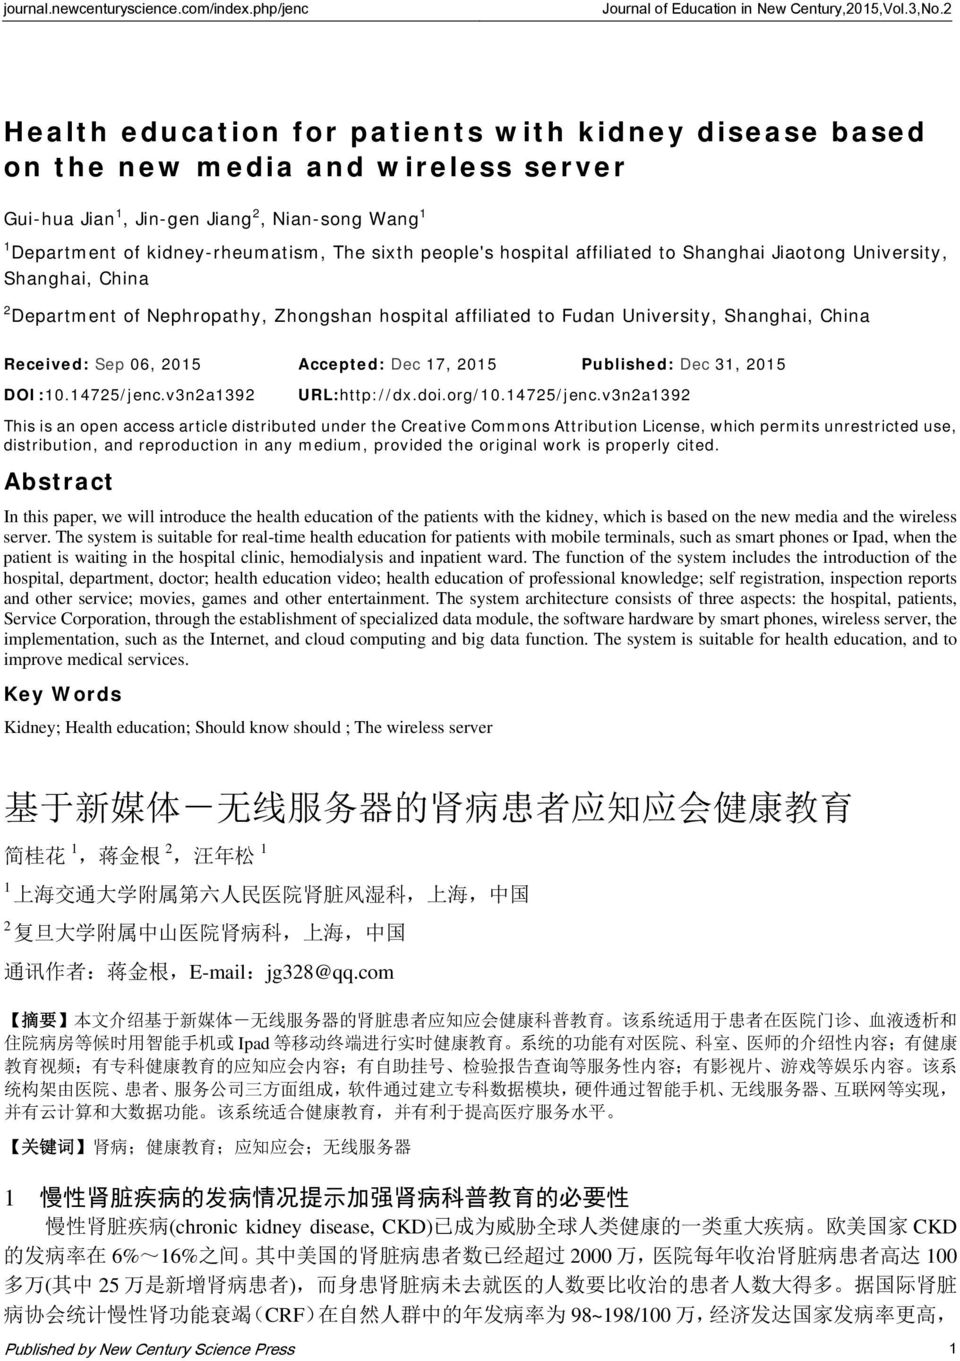 hospital affiliated to Shanghai Jiaotong University, Shanghai, China 2 Department of Nephropathy, Zhongshan hospital affiliated to Fudan University, Shanghai, China Received: Sep 06, 2015 Accepted: